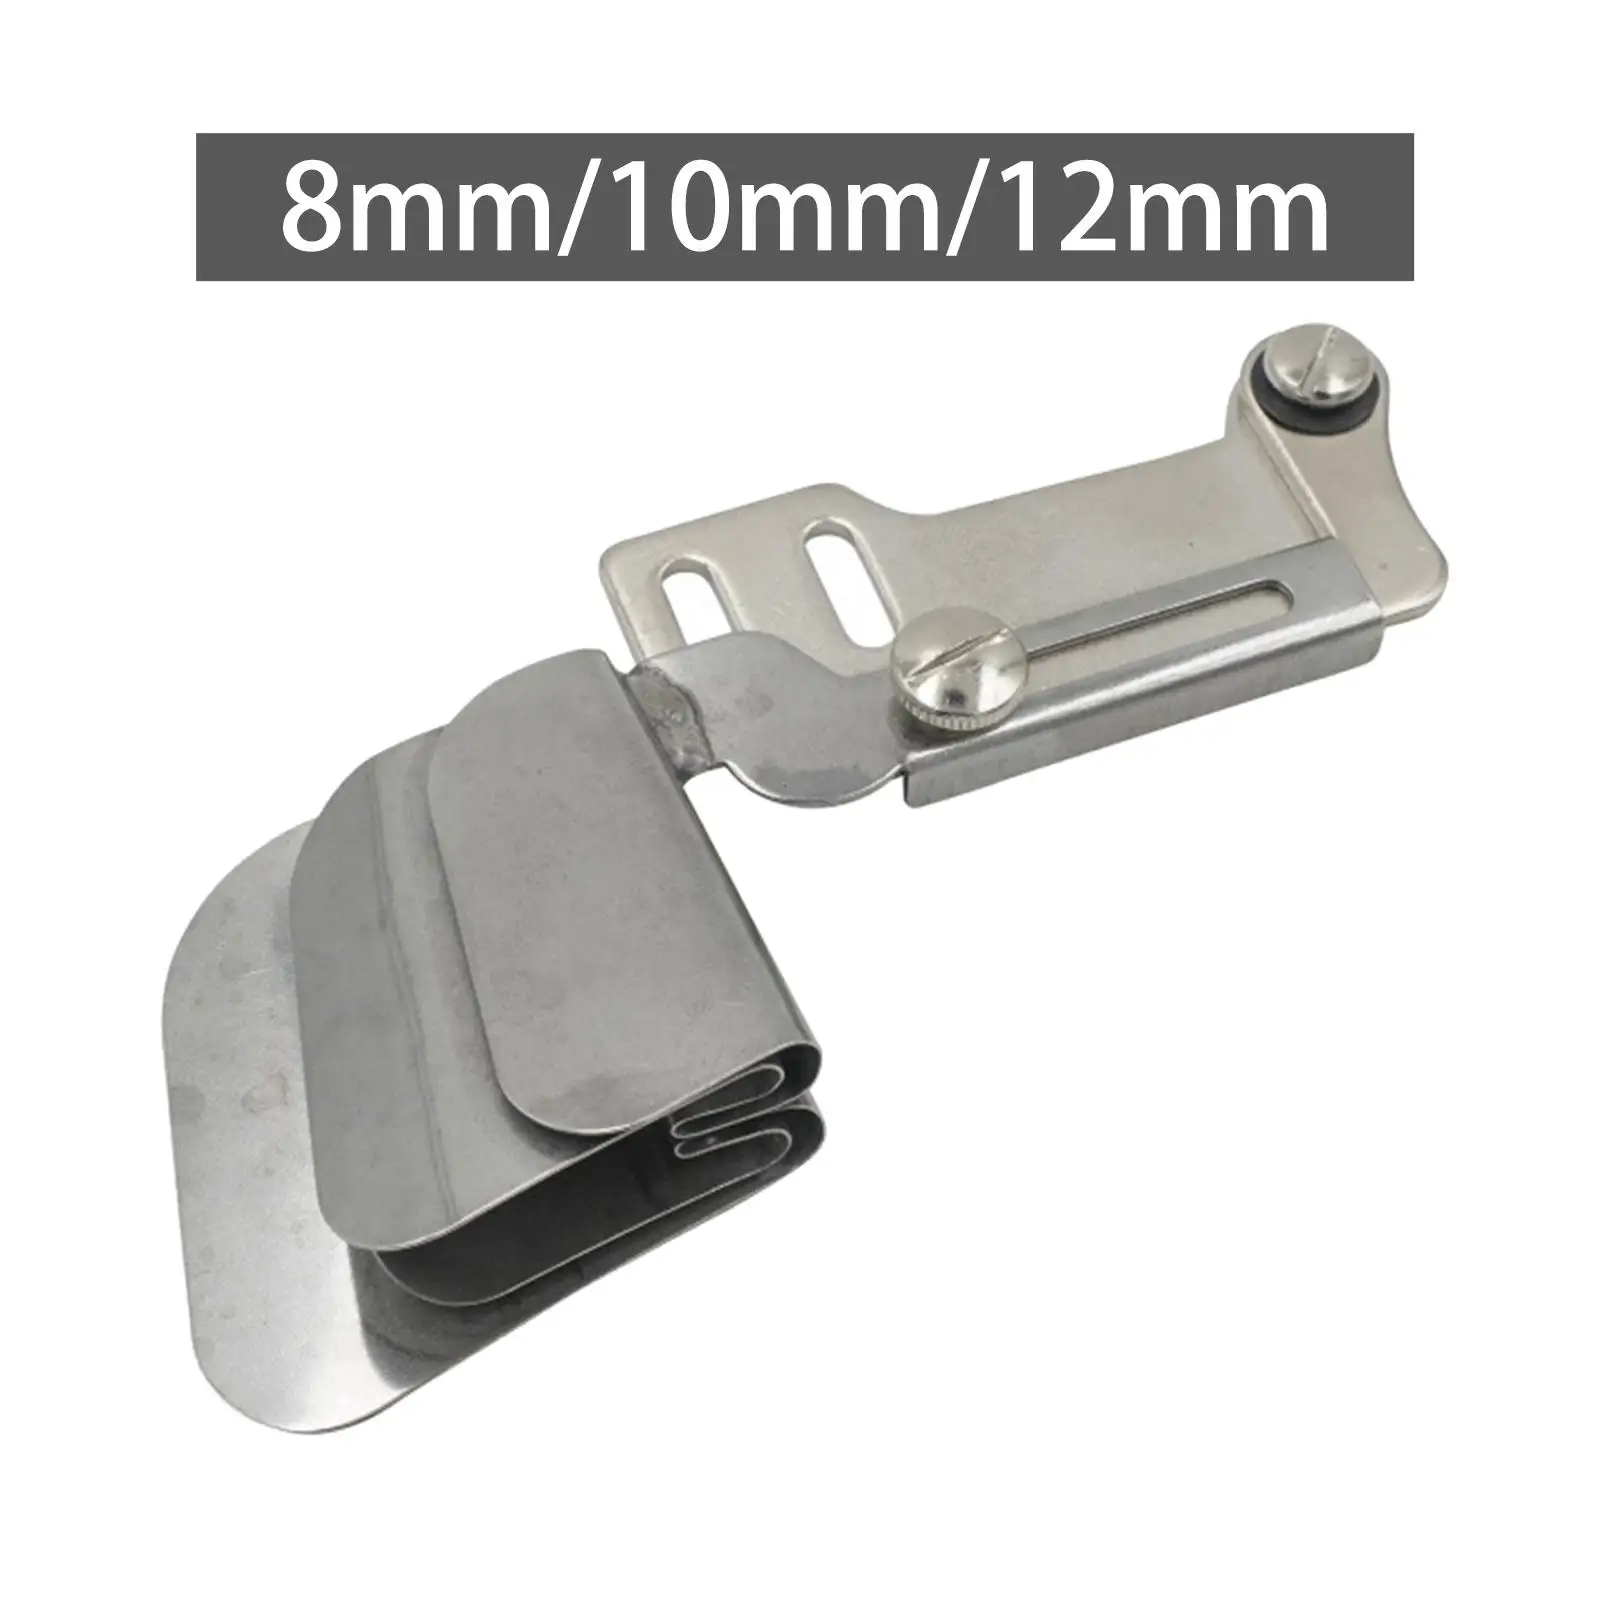 Double Fold Hemmer Foot Part for Home Industrial Sewing Machine Presser Foot for Curtain Bed Sheet Shirts Trousers Quilt Cover